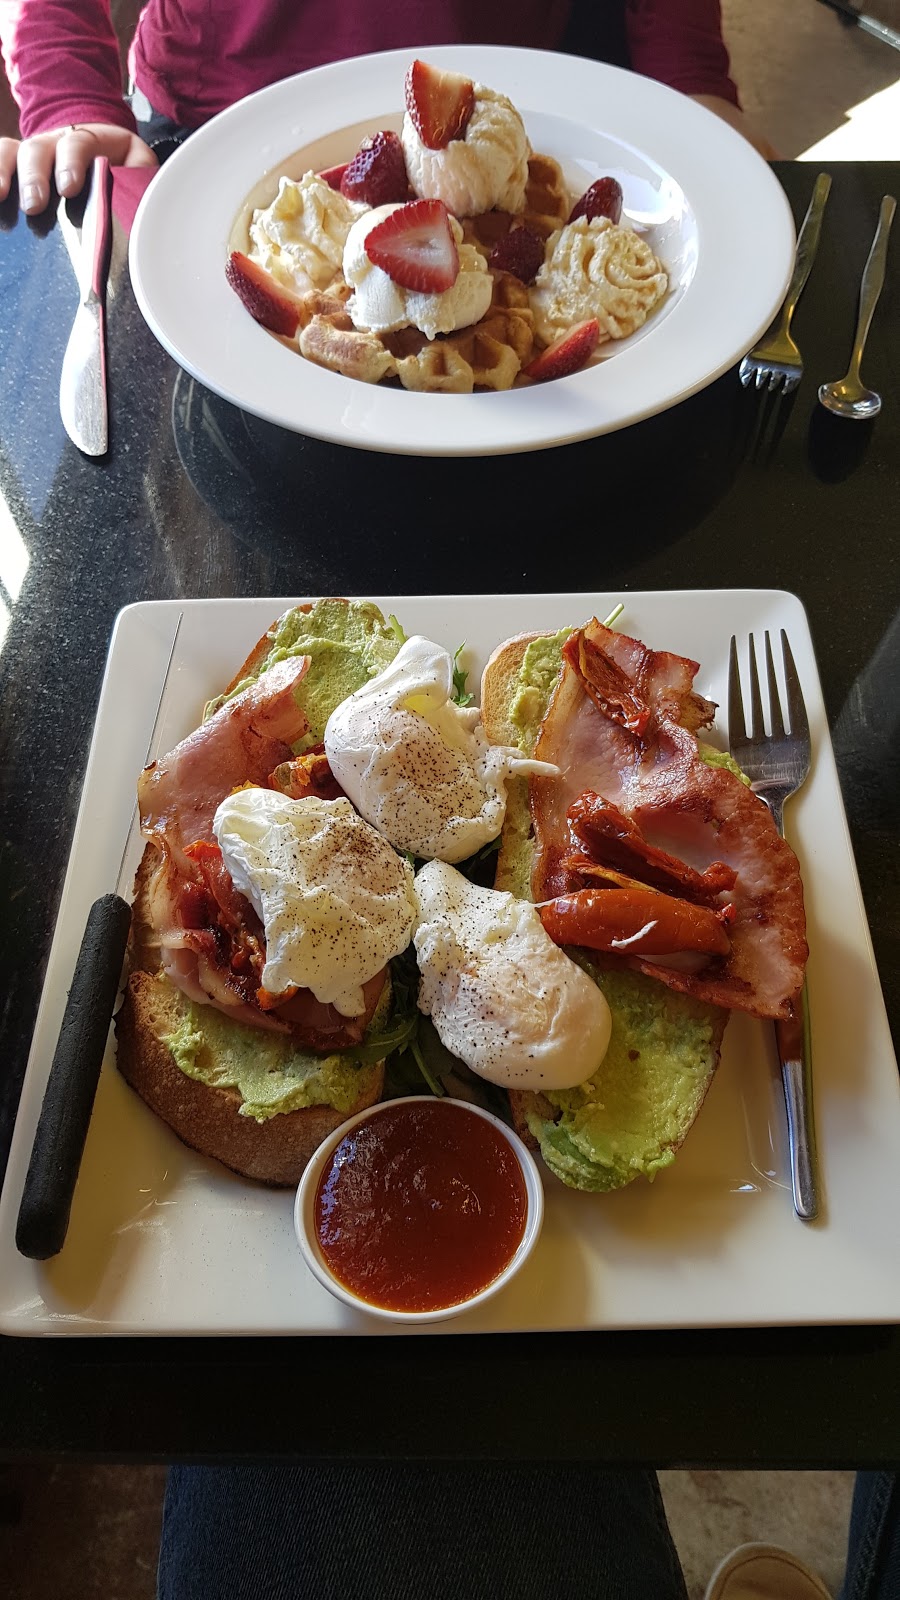 Green Poppy Cafe | cafe | 2/8 Addison St, Shellharbour NSW 2529, Australia | 0242951234 OR +61 2 4295 1234